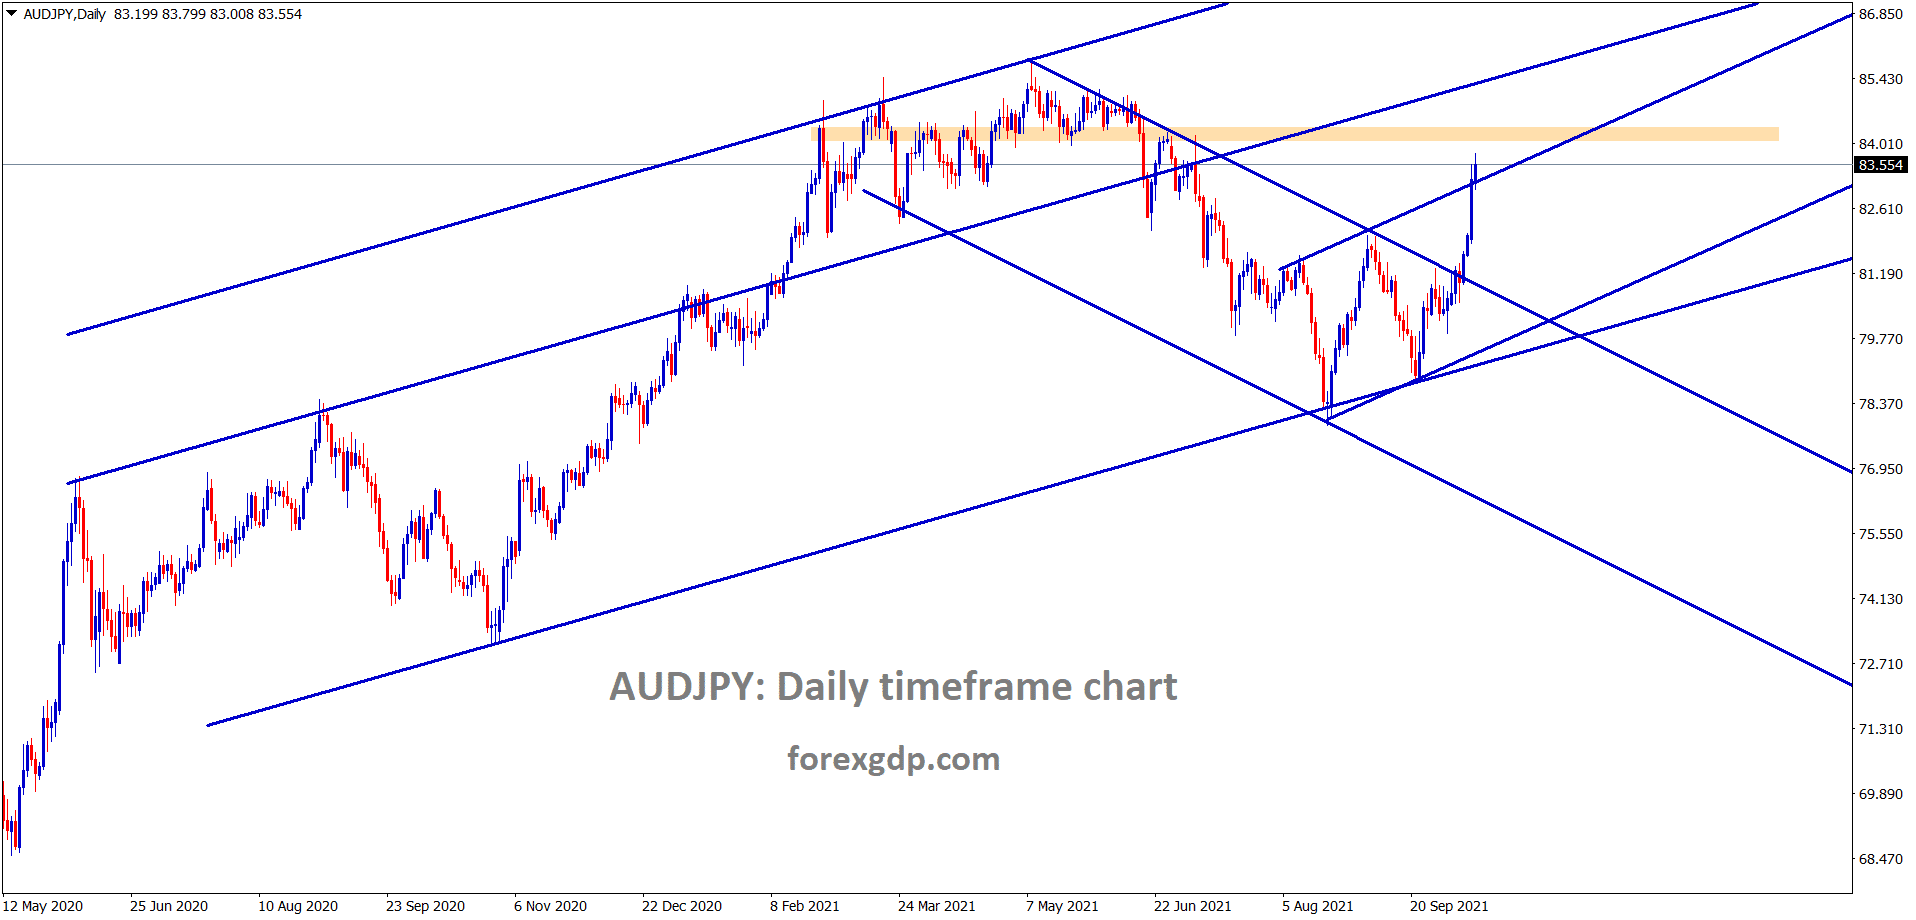 AUDJPY is moving continuously breaking the highs with buyers pressure